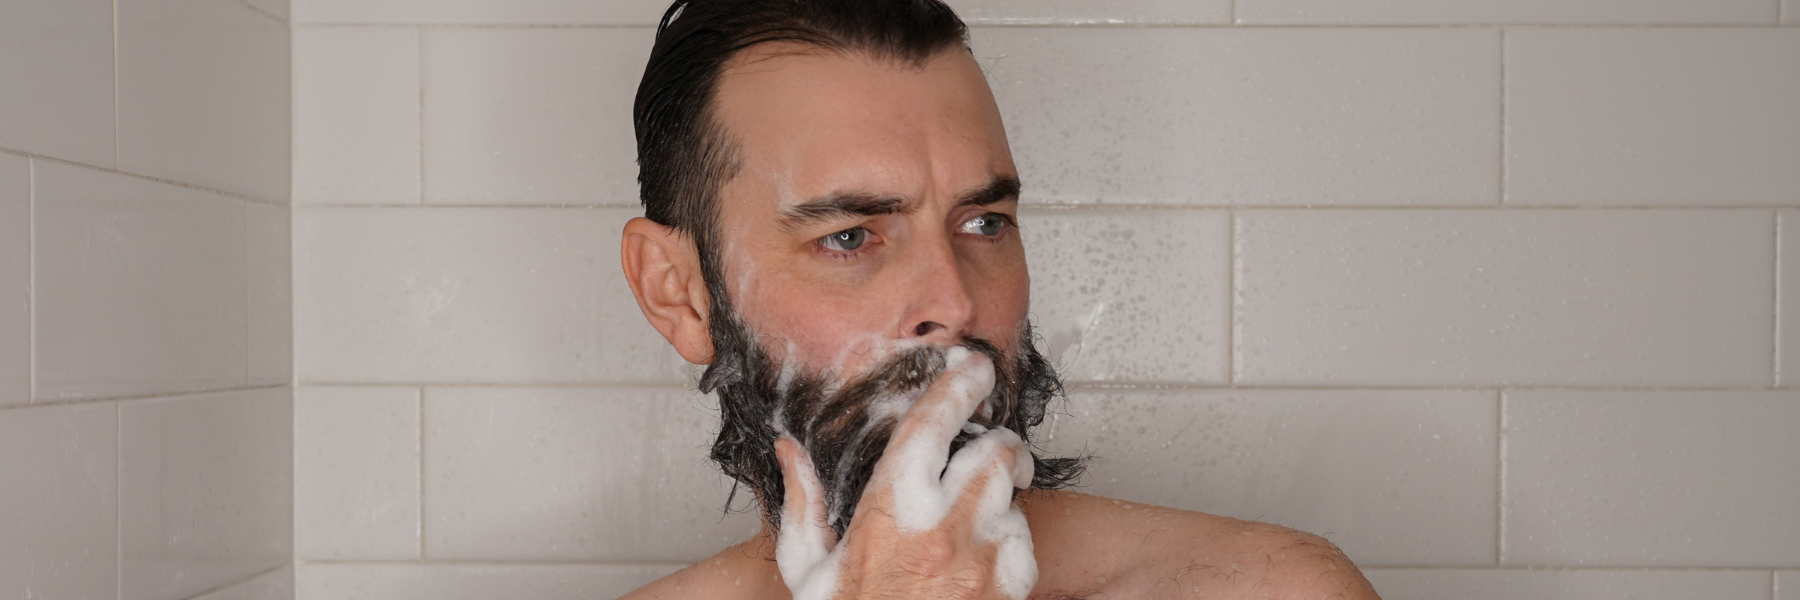 Are You Washing Your Beard Wrong? 3 Common Mistakes